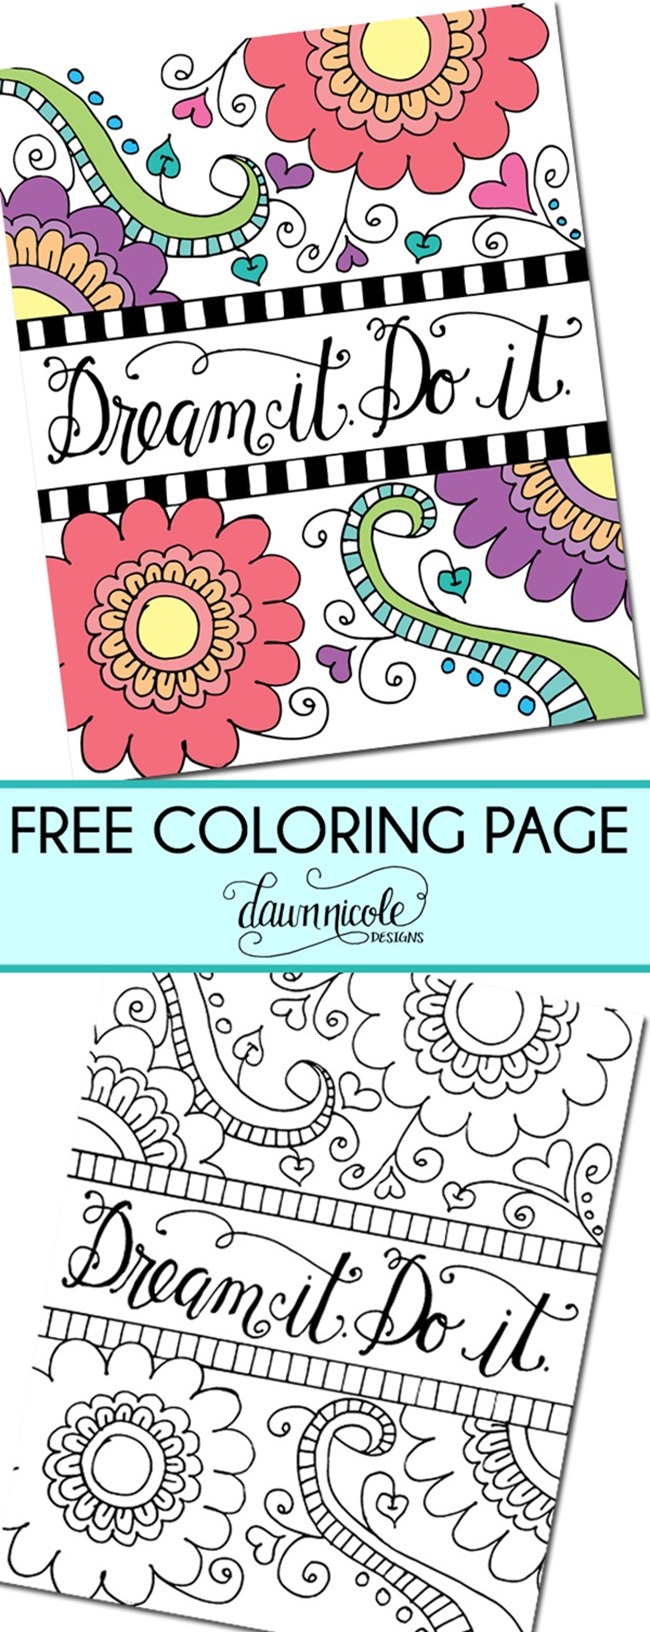 12 Inspiring Quote Coloring Pages for Adults - Dream It